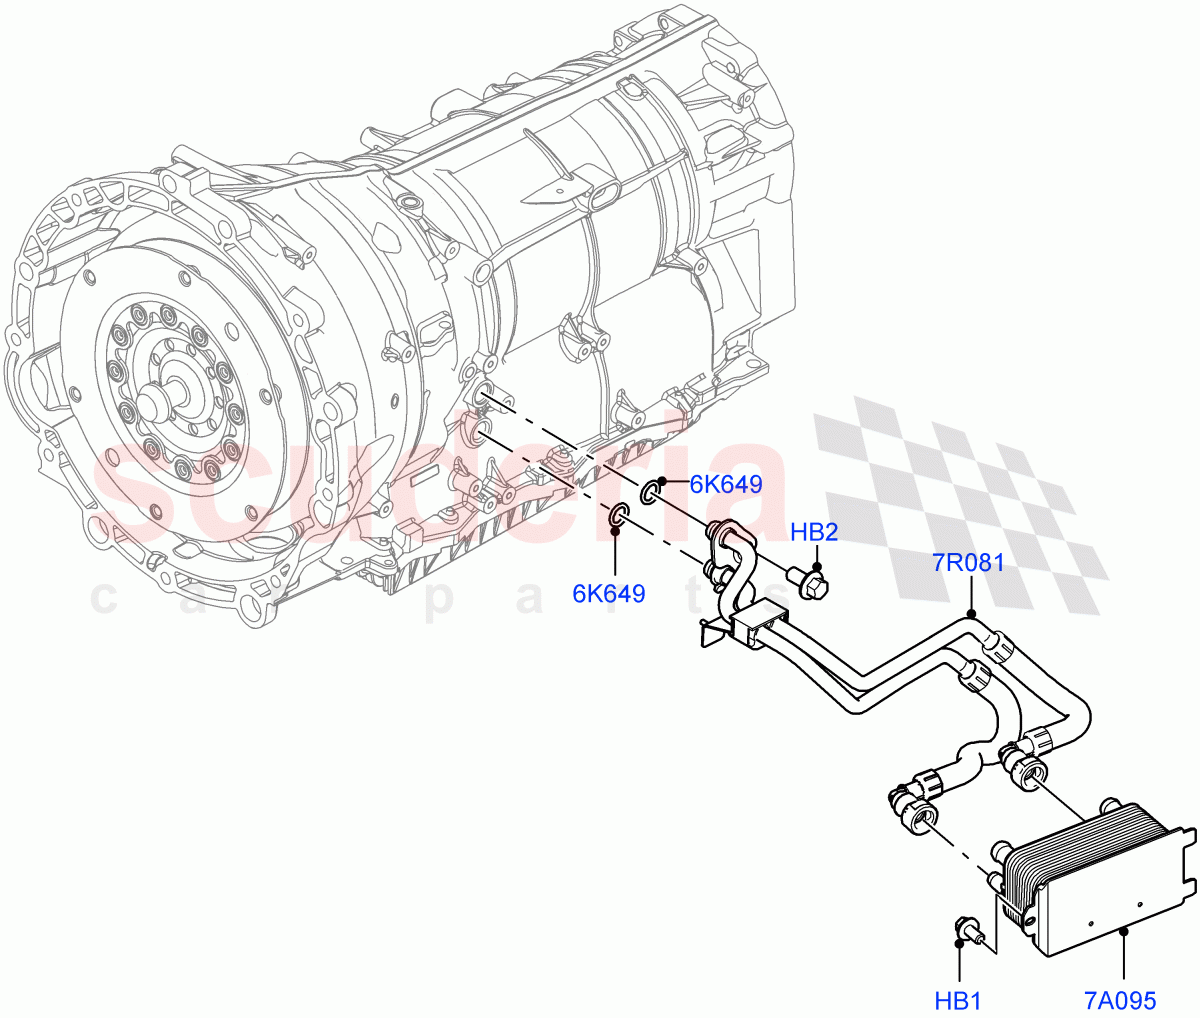 Transmission Cooling Systems(Nitra Plant Build)(3.0L AJ20P6 Petrol High,8 Speed Auto Trans ZF 8HP76,3.0L AJ20D6 Diesel High) of Land Rover Land Rover Discovery 5 (2017+) [3.0 Diesel 24V DOHC TC]